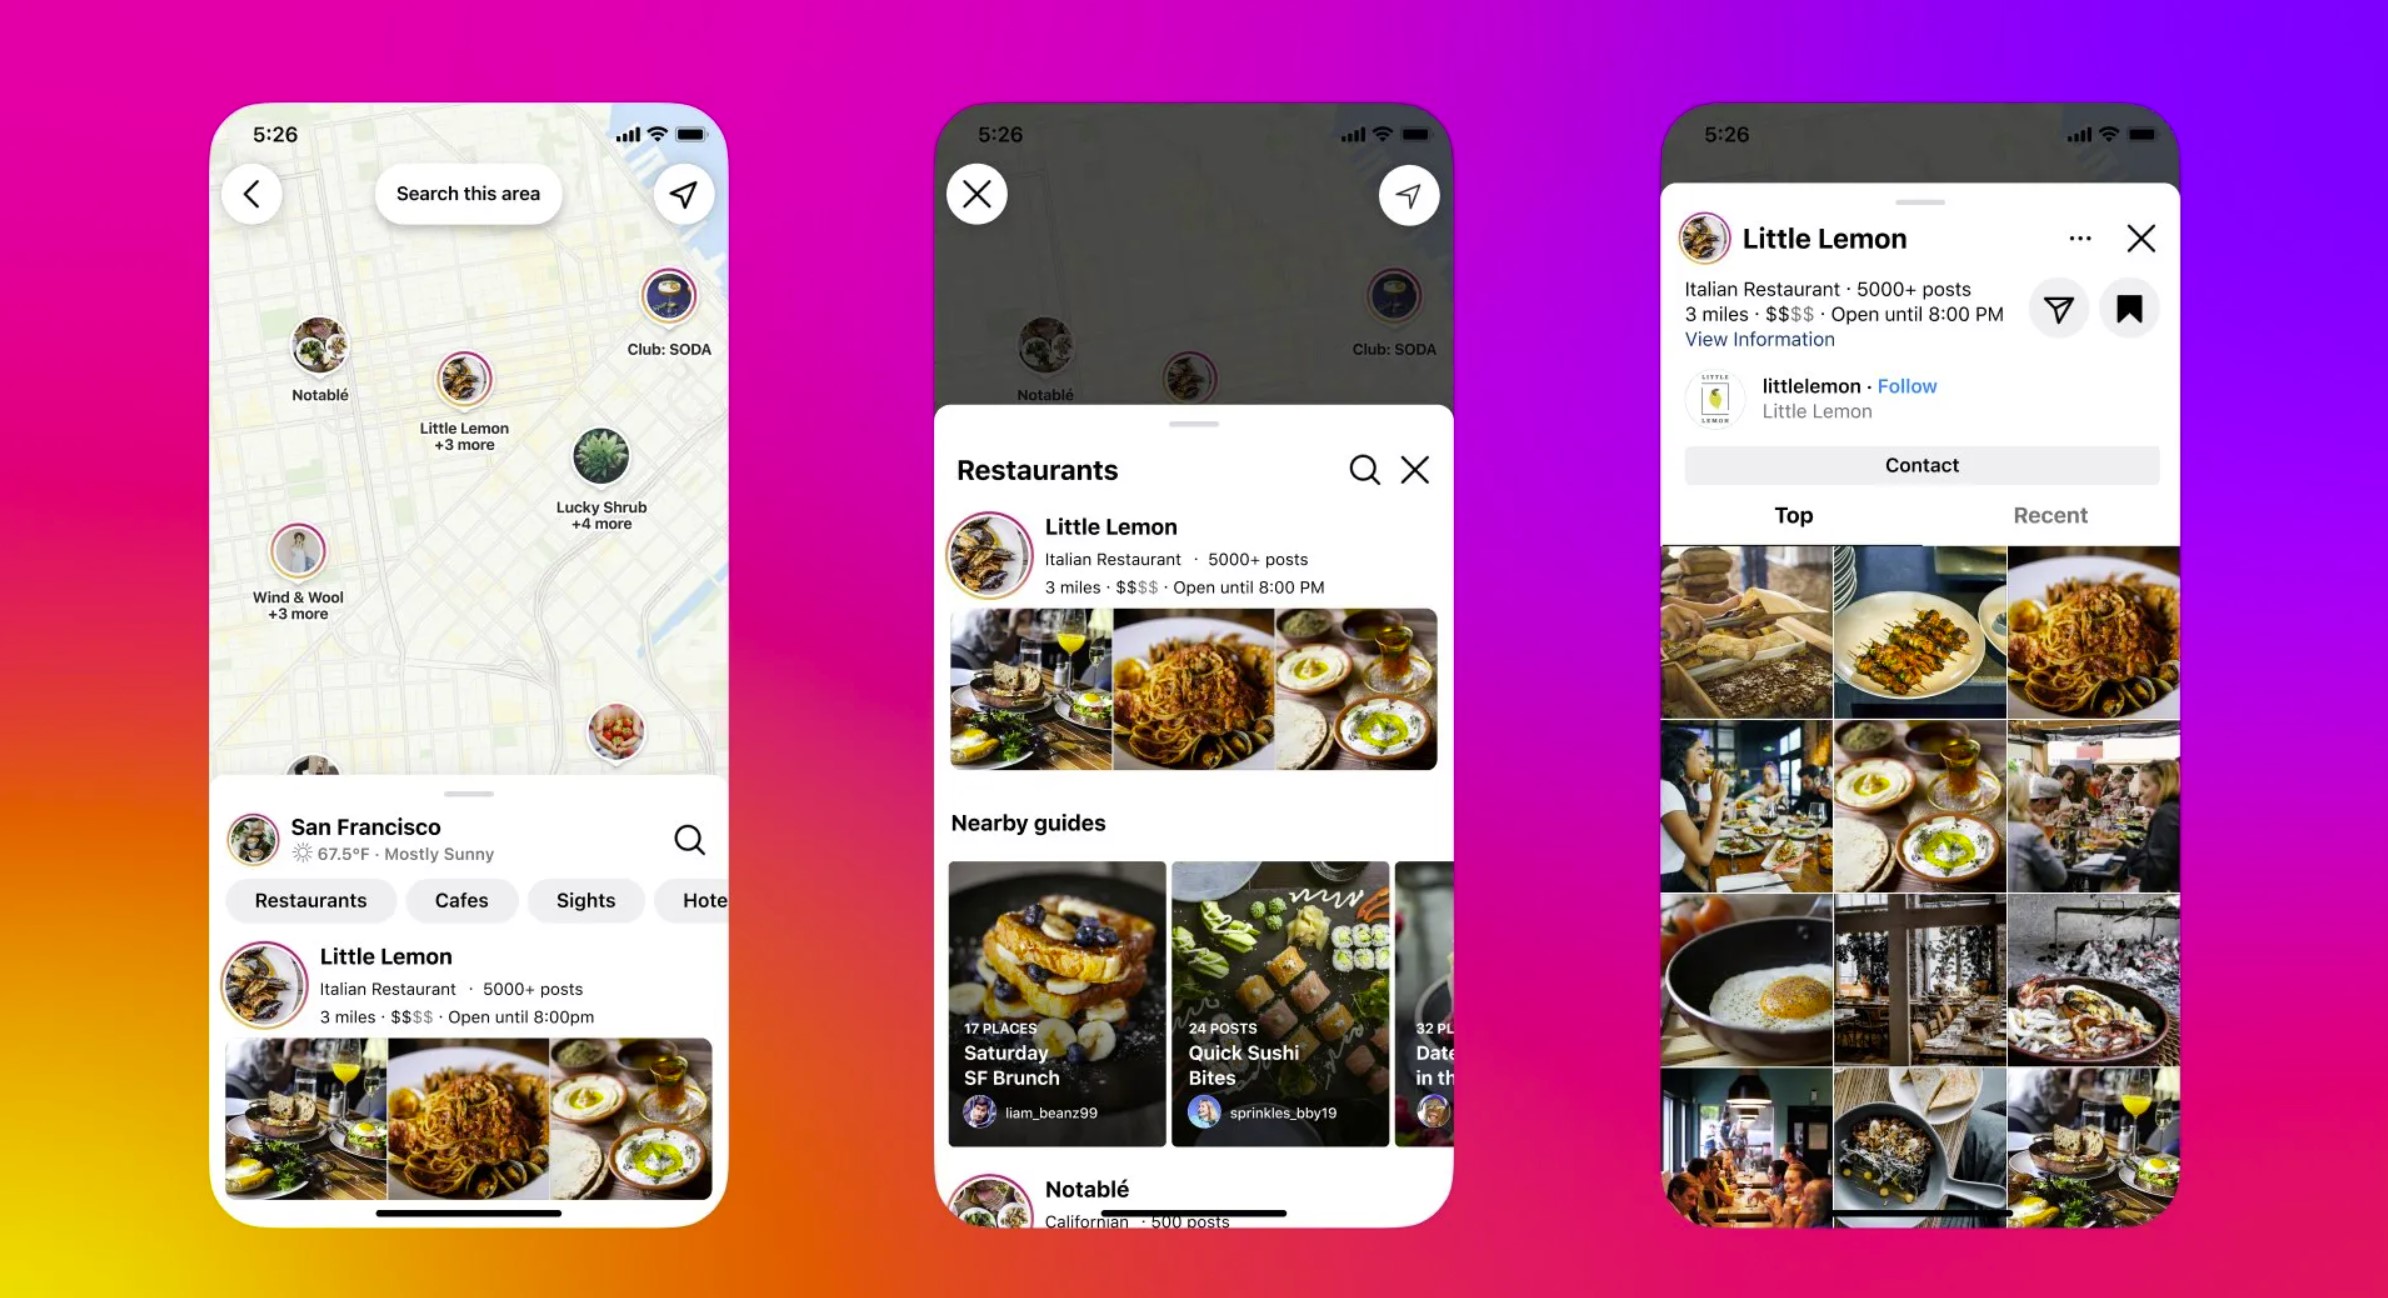 Instagram introduces new map experience to help users find more locations